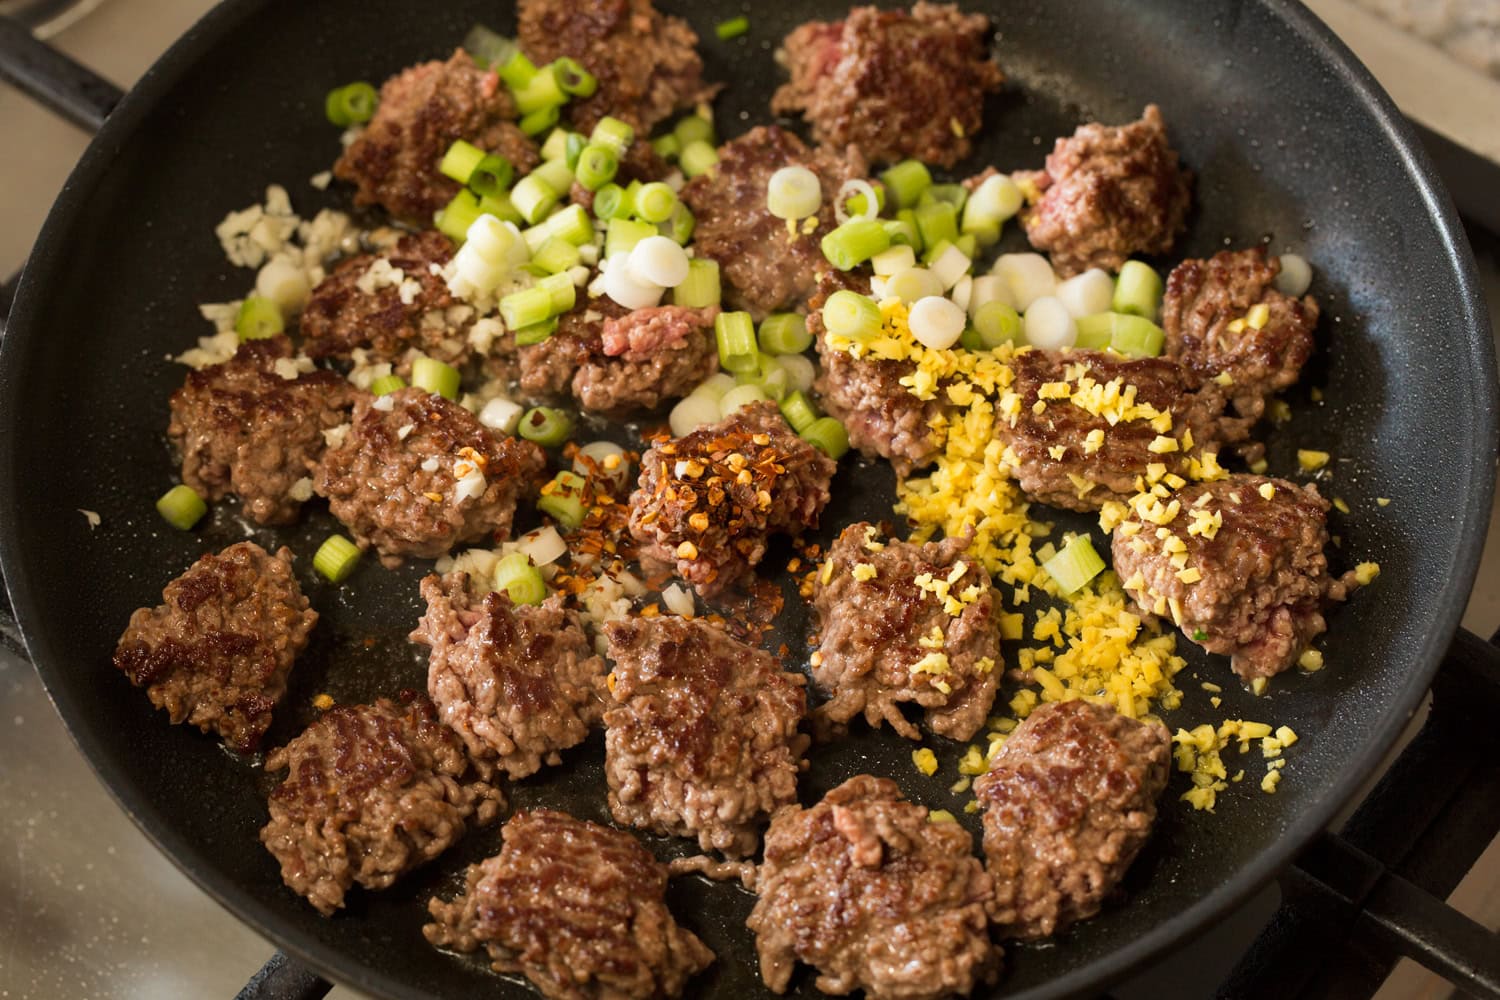 Ground beef shown browned on one side with green onions, garlic and ginger added.